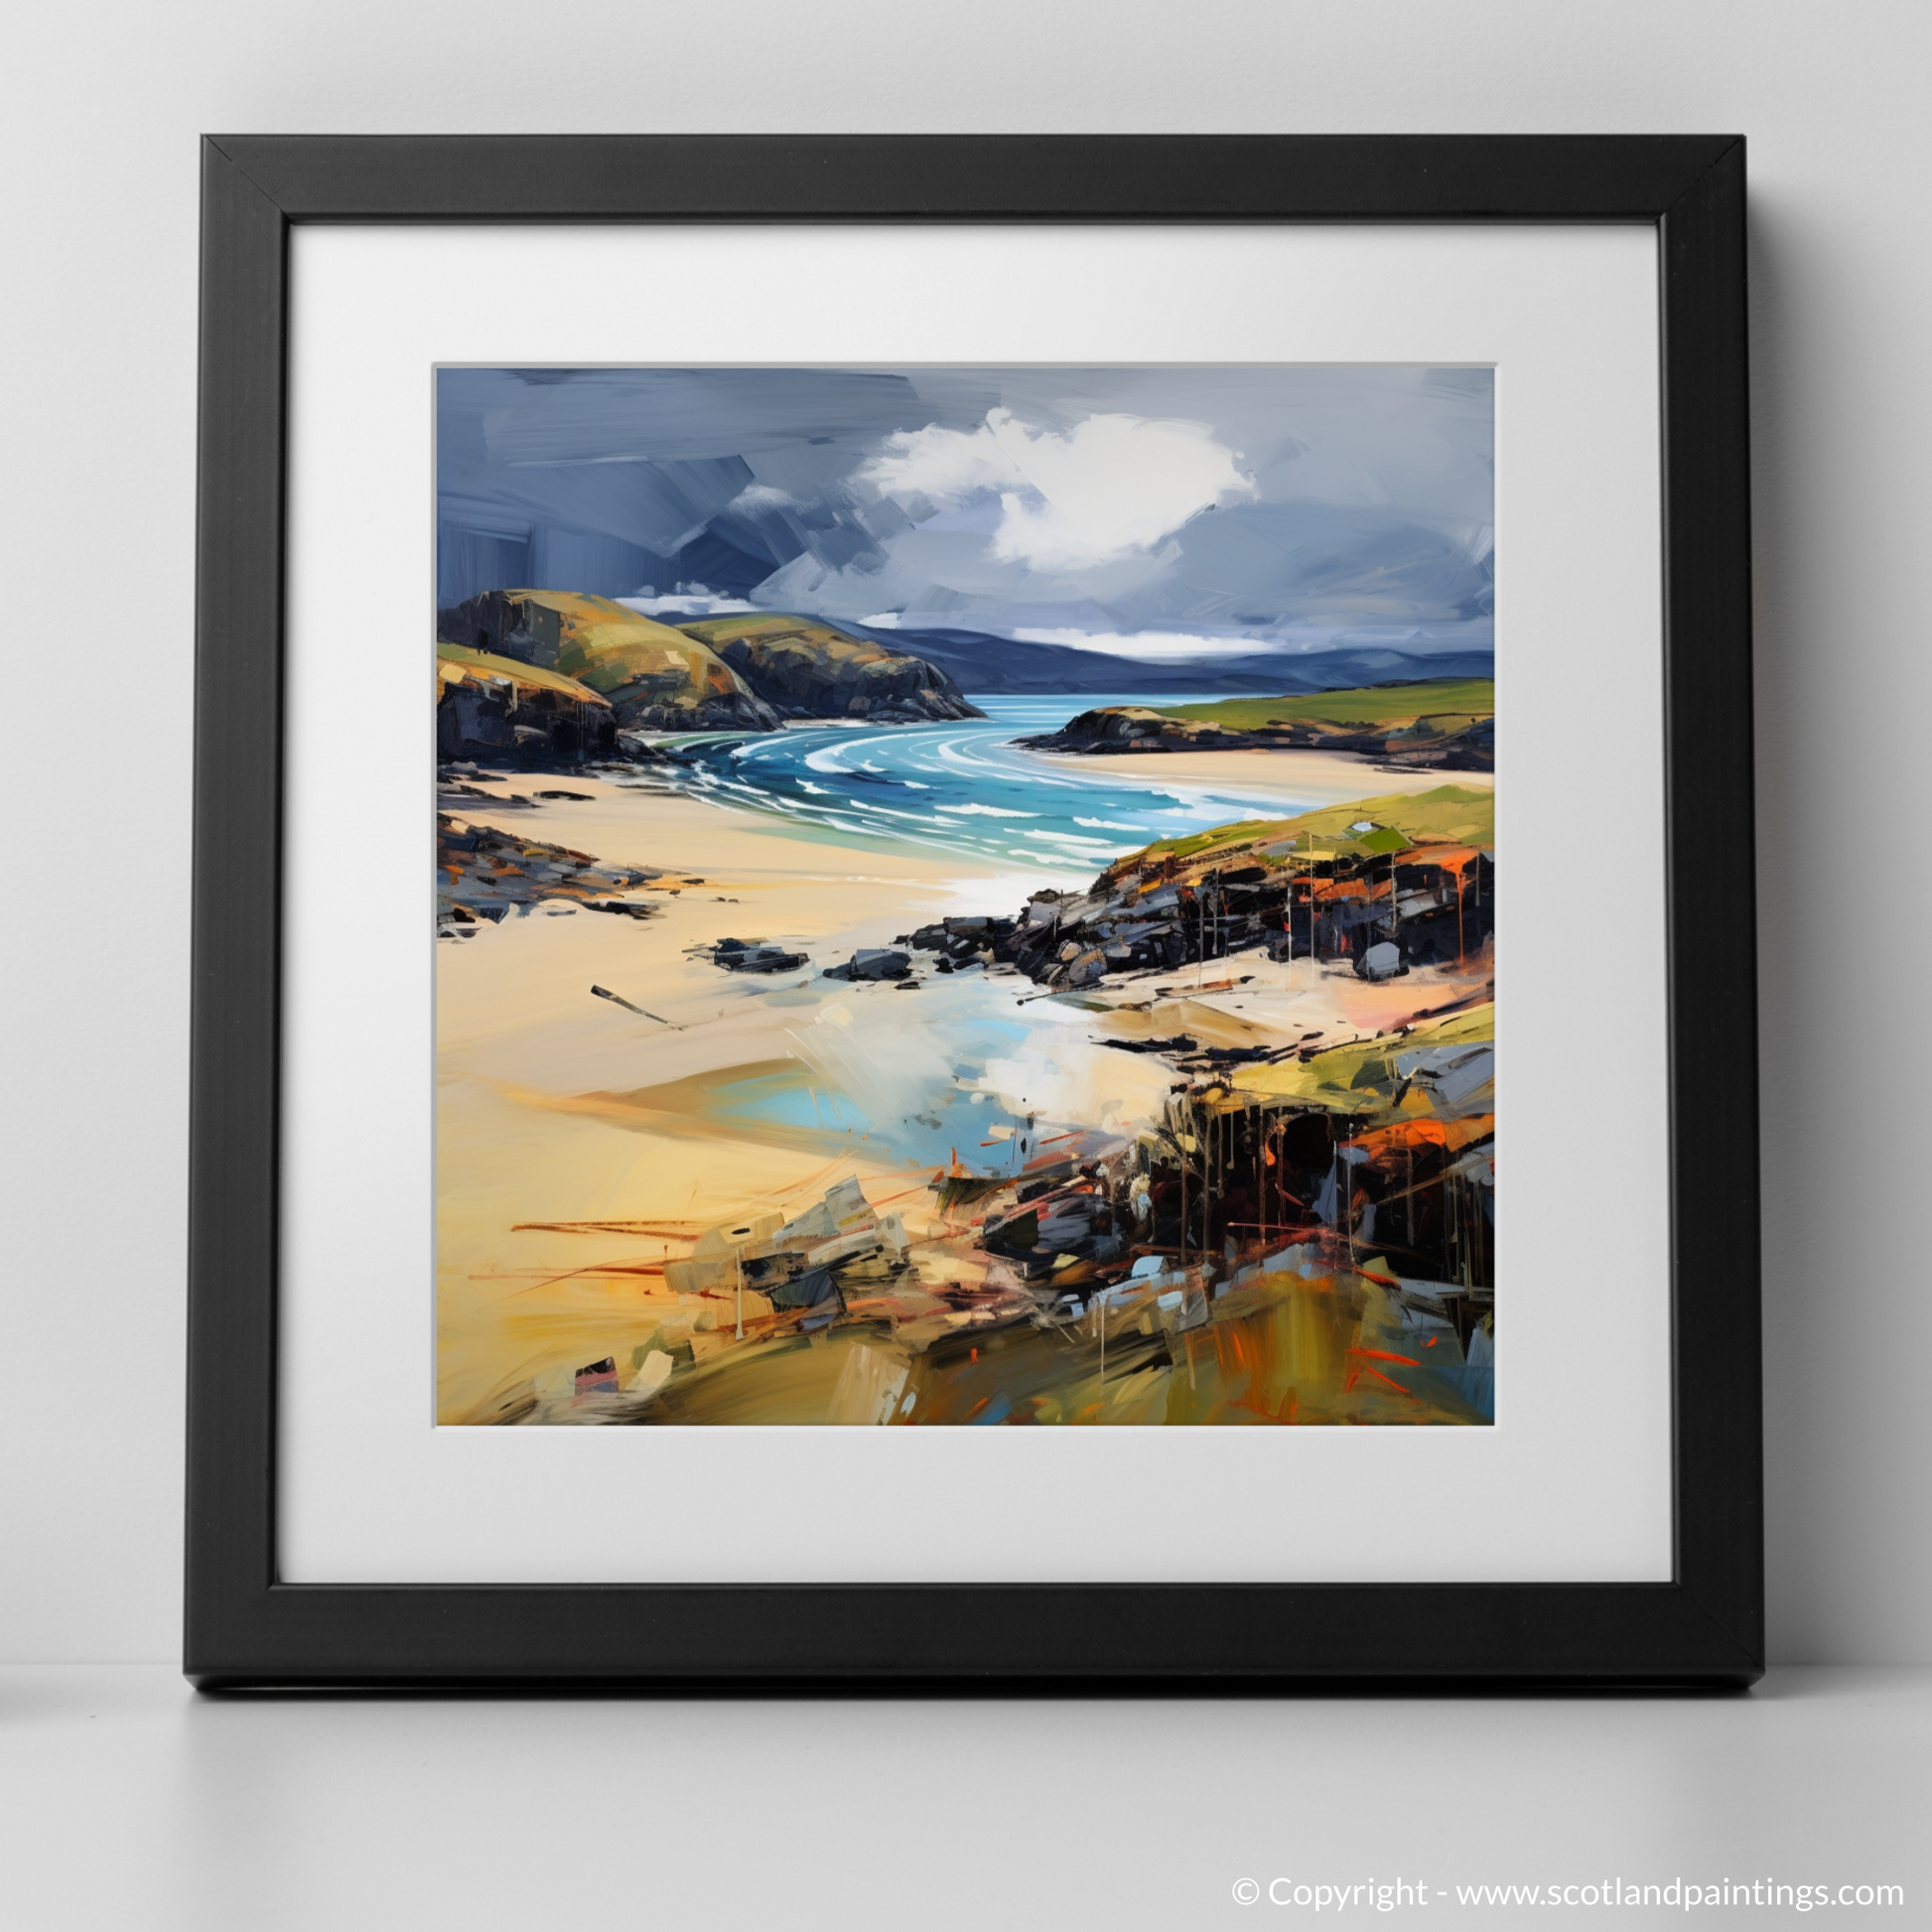 Art Print of Balnakeil Bay, Durness, Sutherland with a black frame